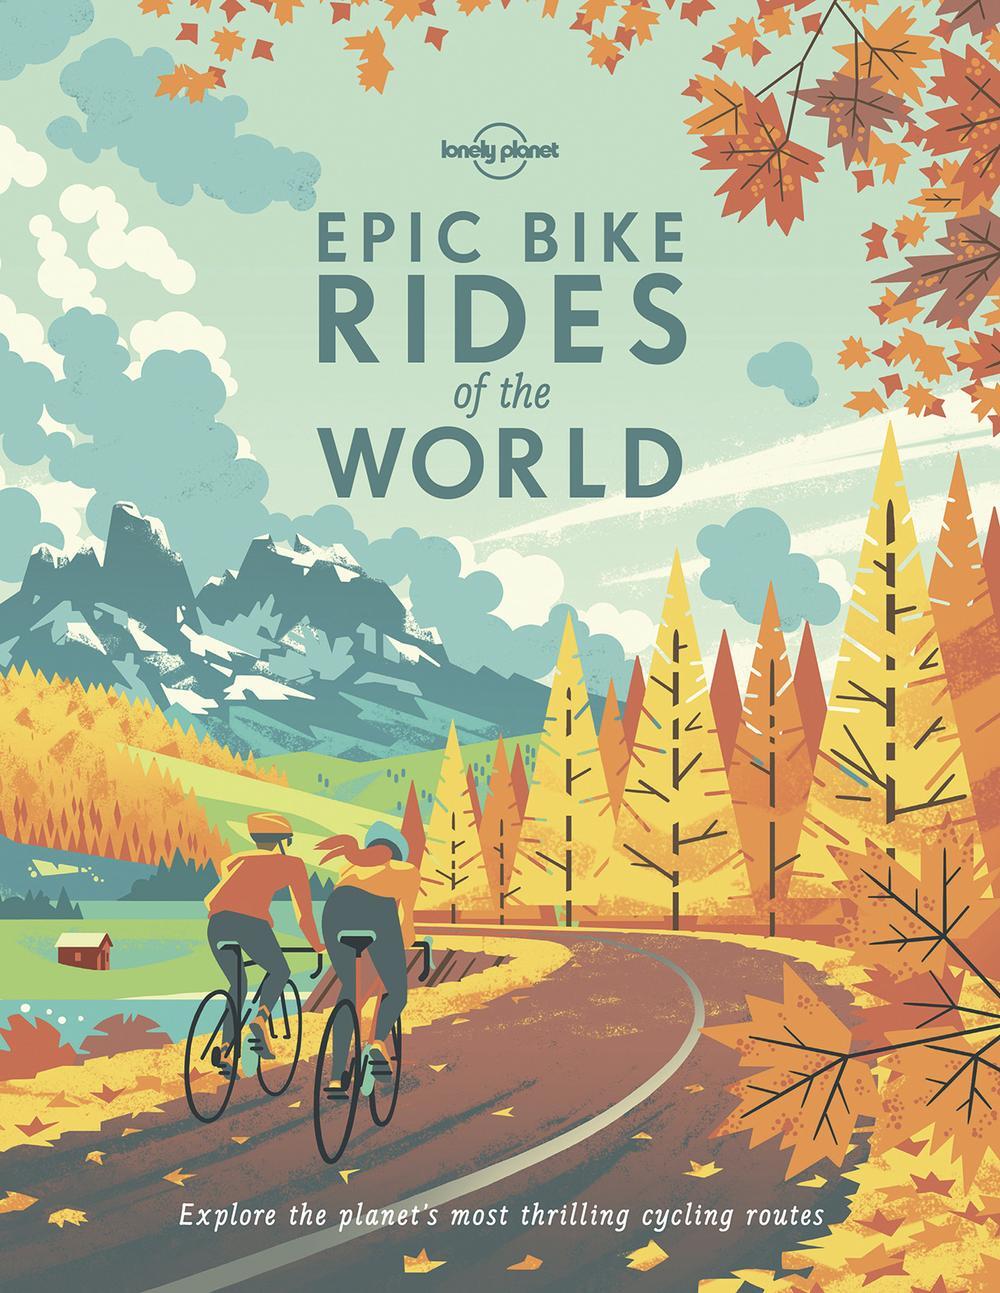 Rides　of　Epic　Planet　Lonely　World　Bike　the